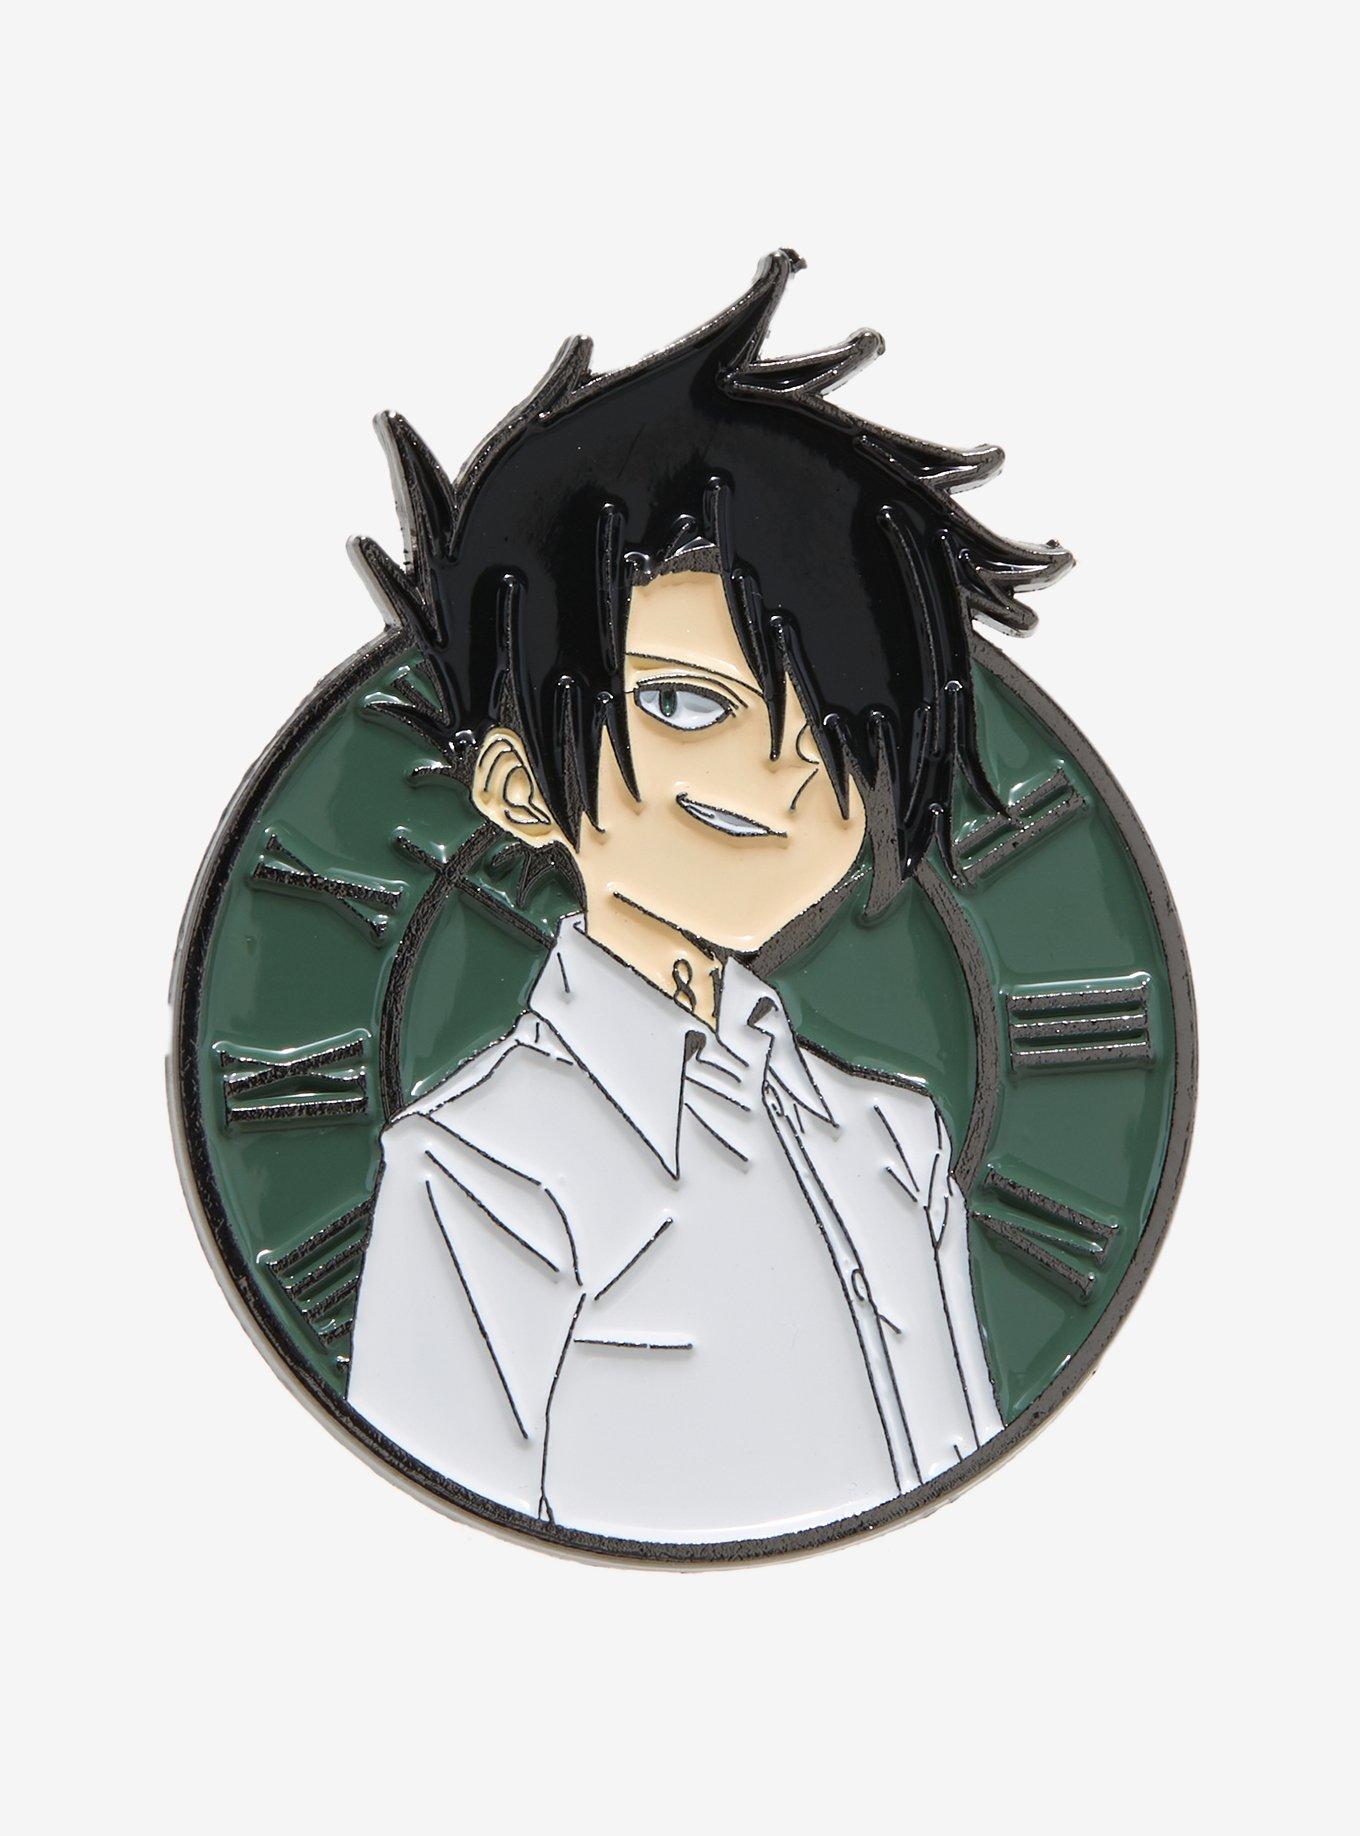 Pin on The Promised Neverland